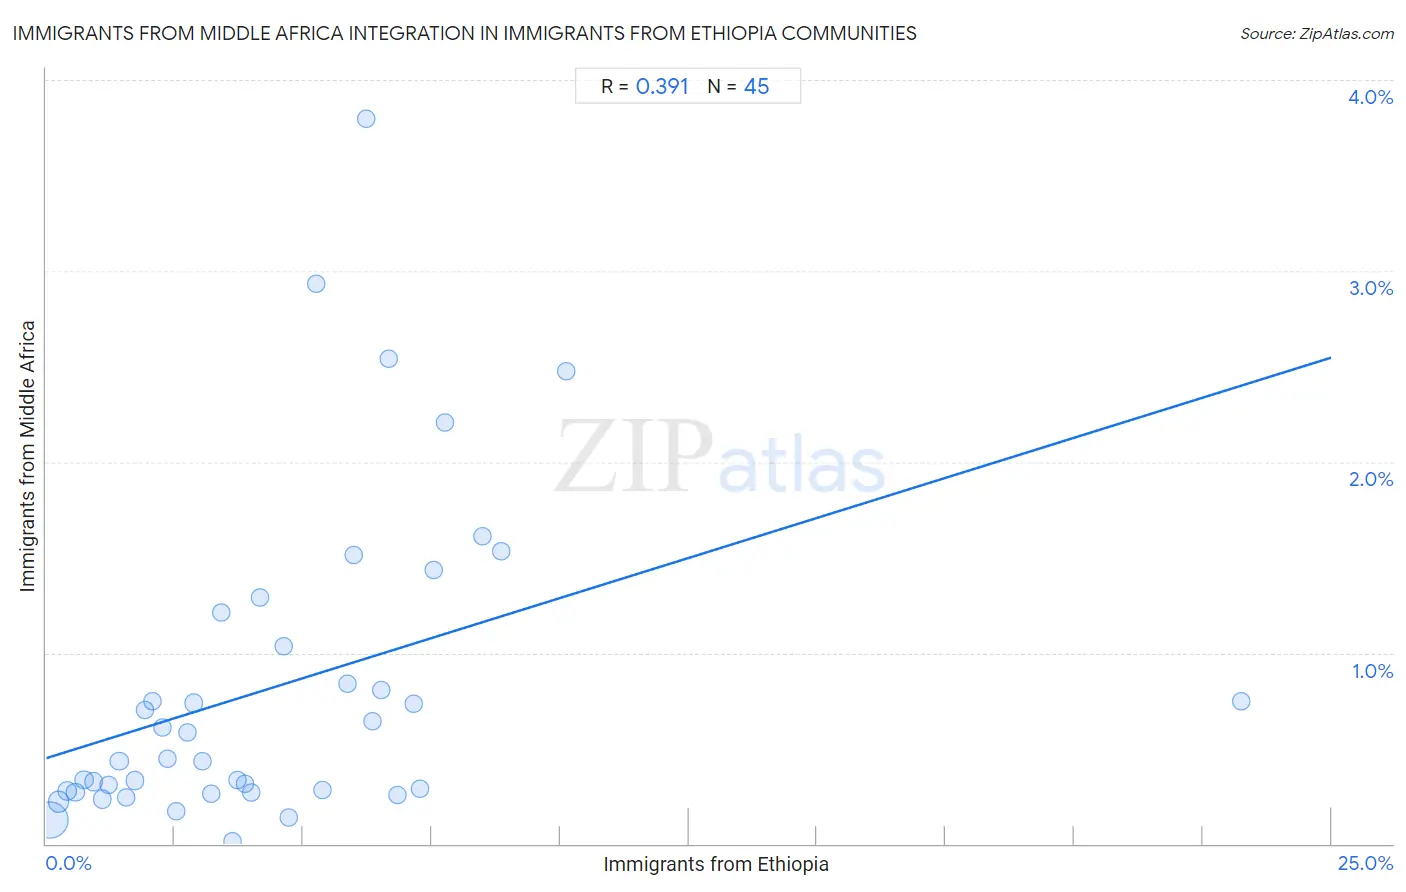 Immigrants from Ethiopia Integration in Immigrants from Middle Africa Communities